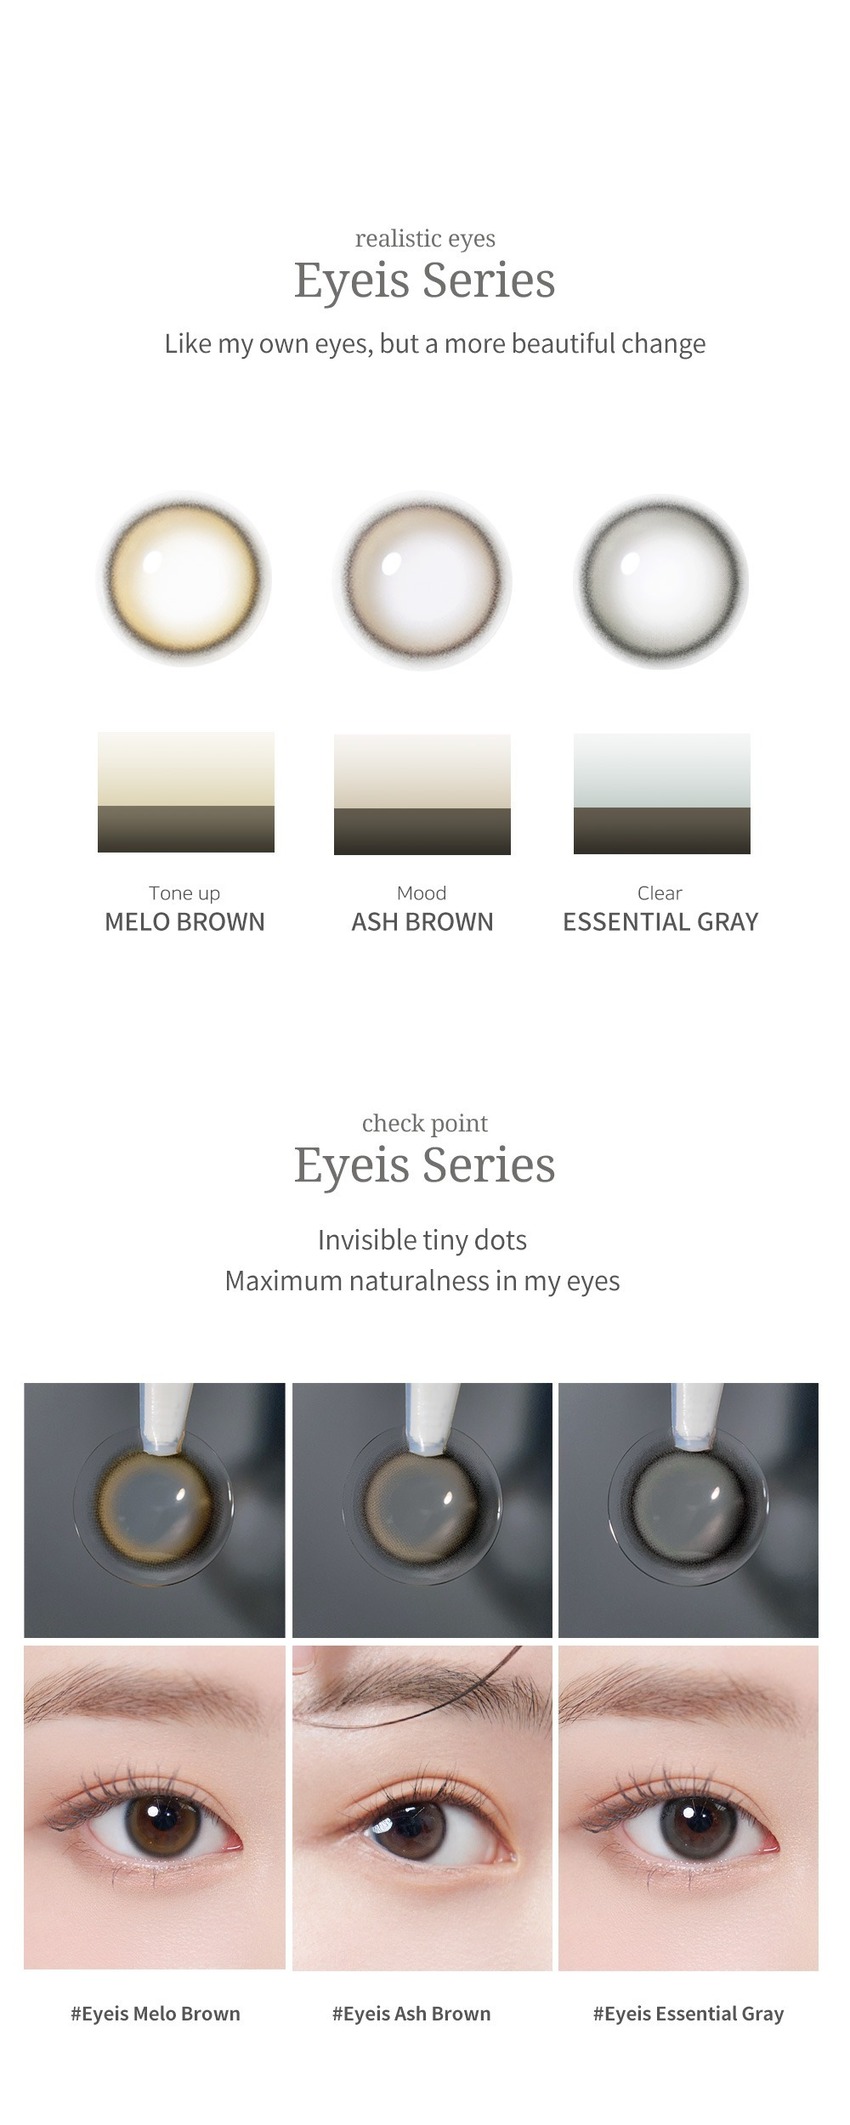 
Elevate Your Urban Style: QueenContacts' Ash Brown Colored Contact